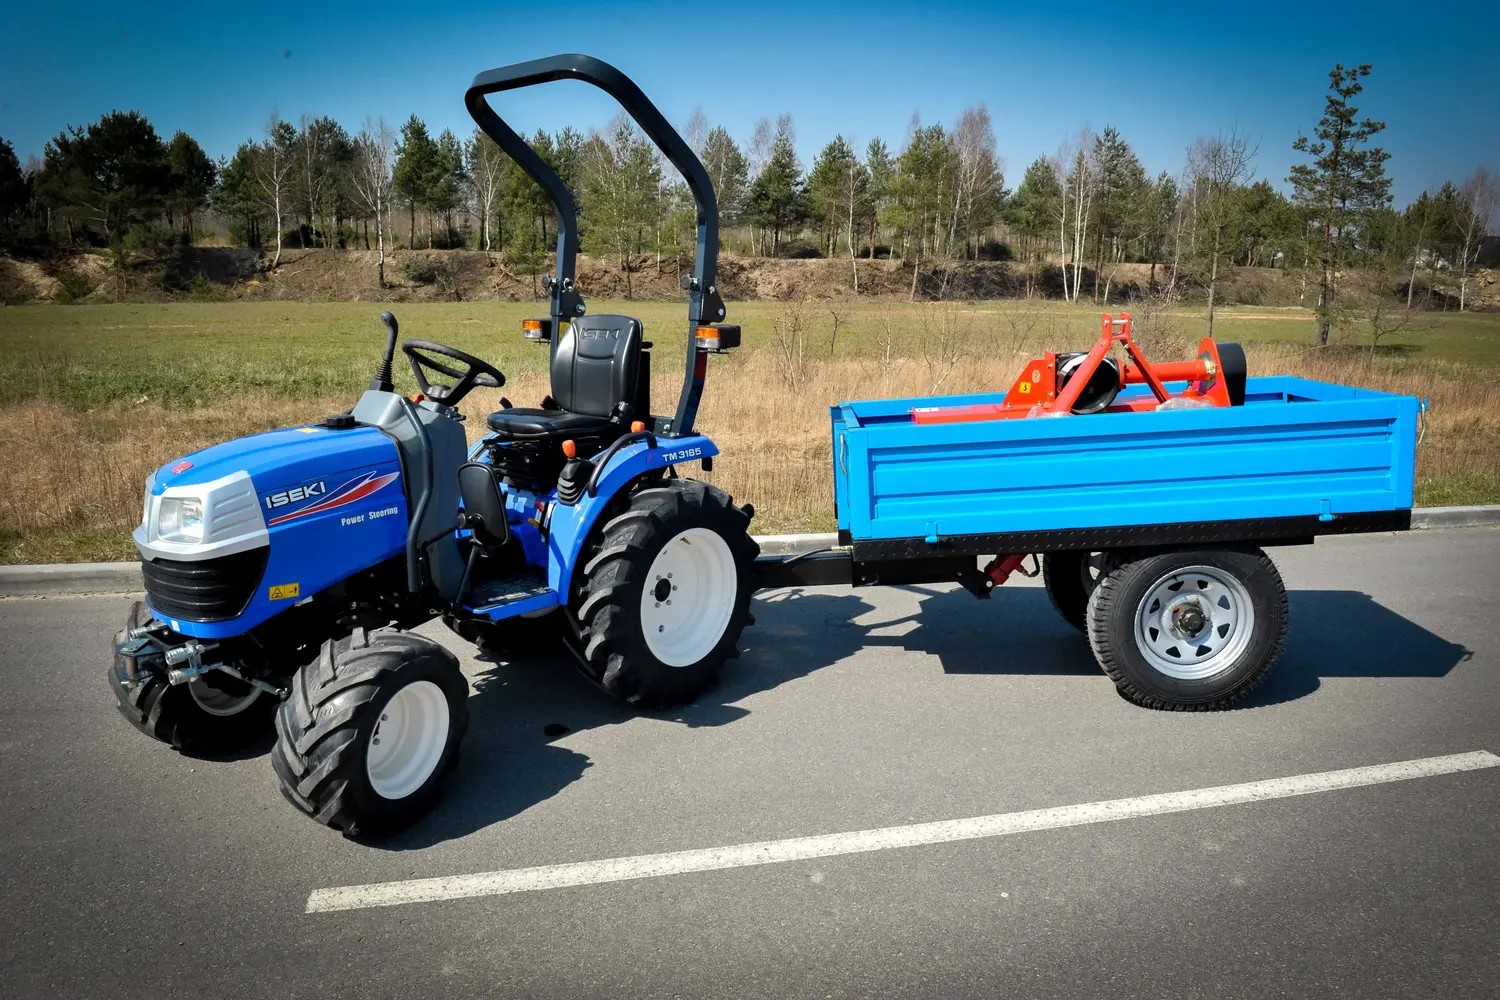 Brand new piece straight from the showroom Iseki TM3185 4x4 18KM, trailer with kiper and EFGC-K115 flail mower